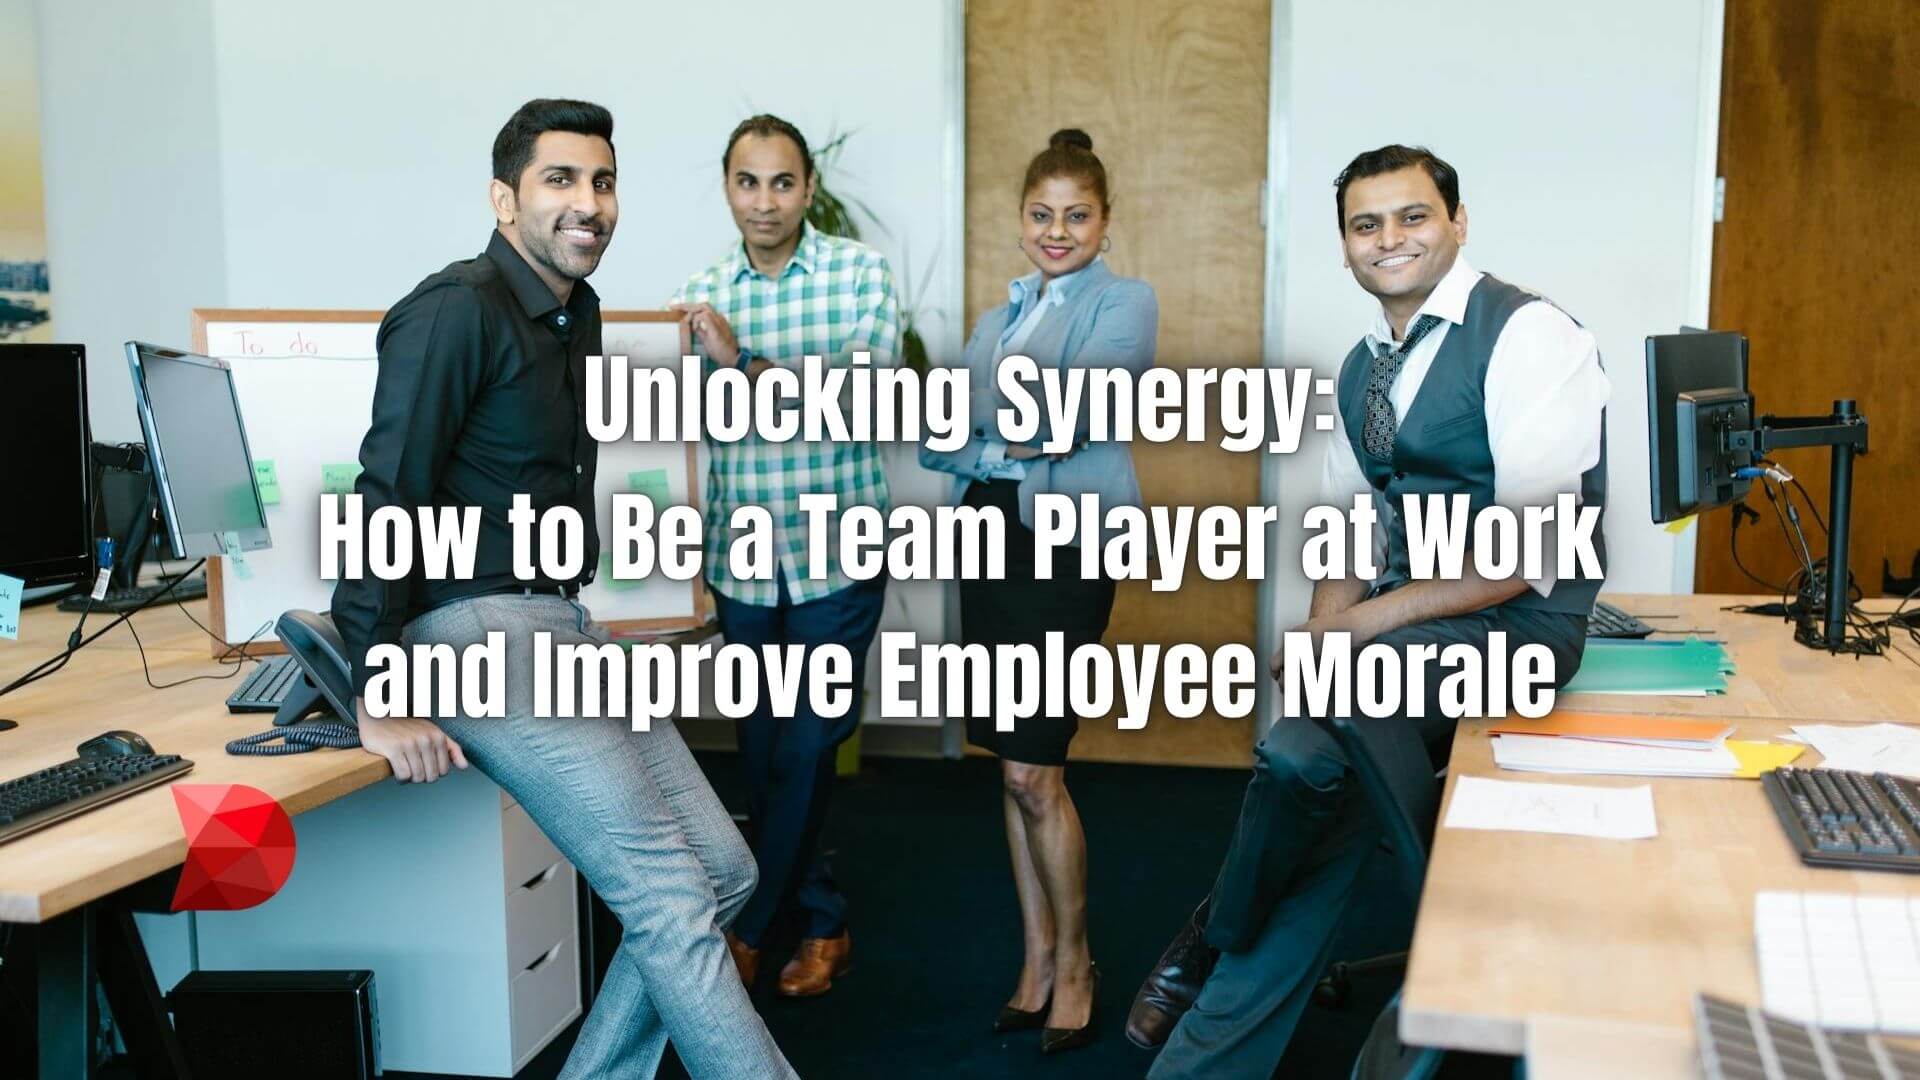 Elevate workplace harmony and productivity! Click here to learn how to excel as a team player and foster high morale at work.